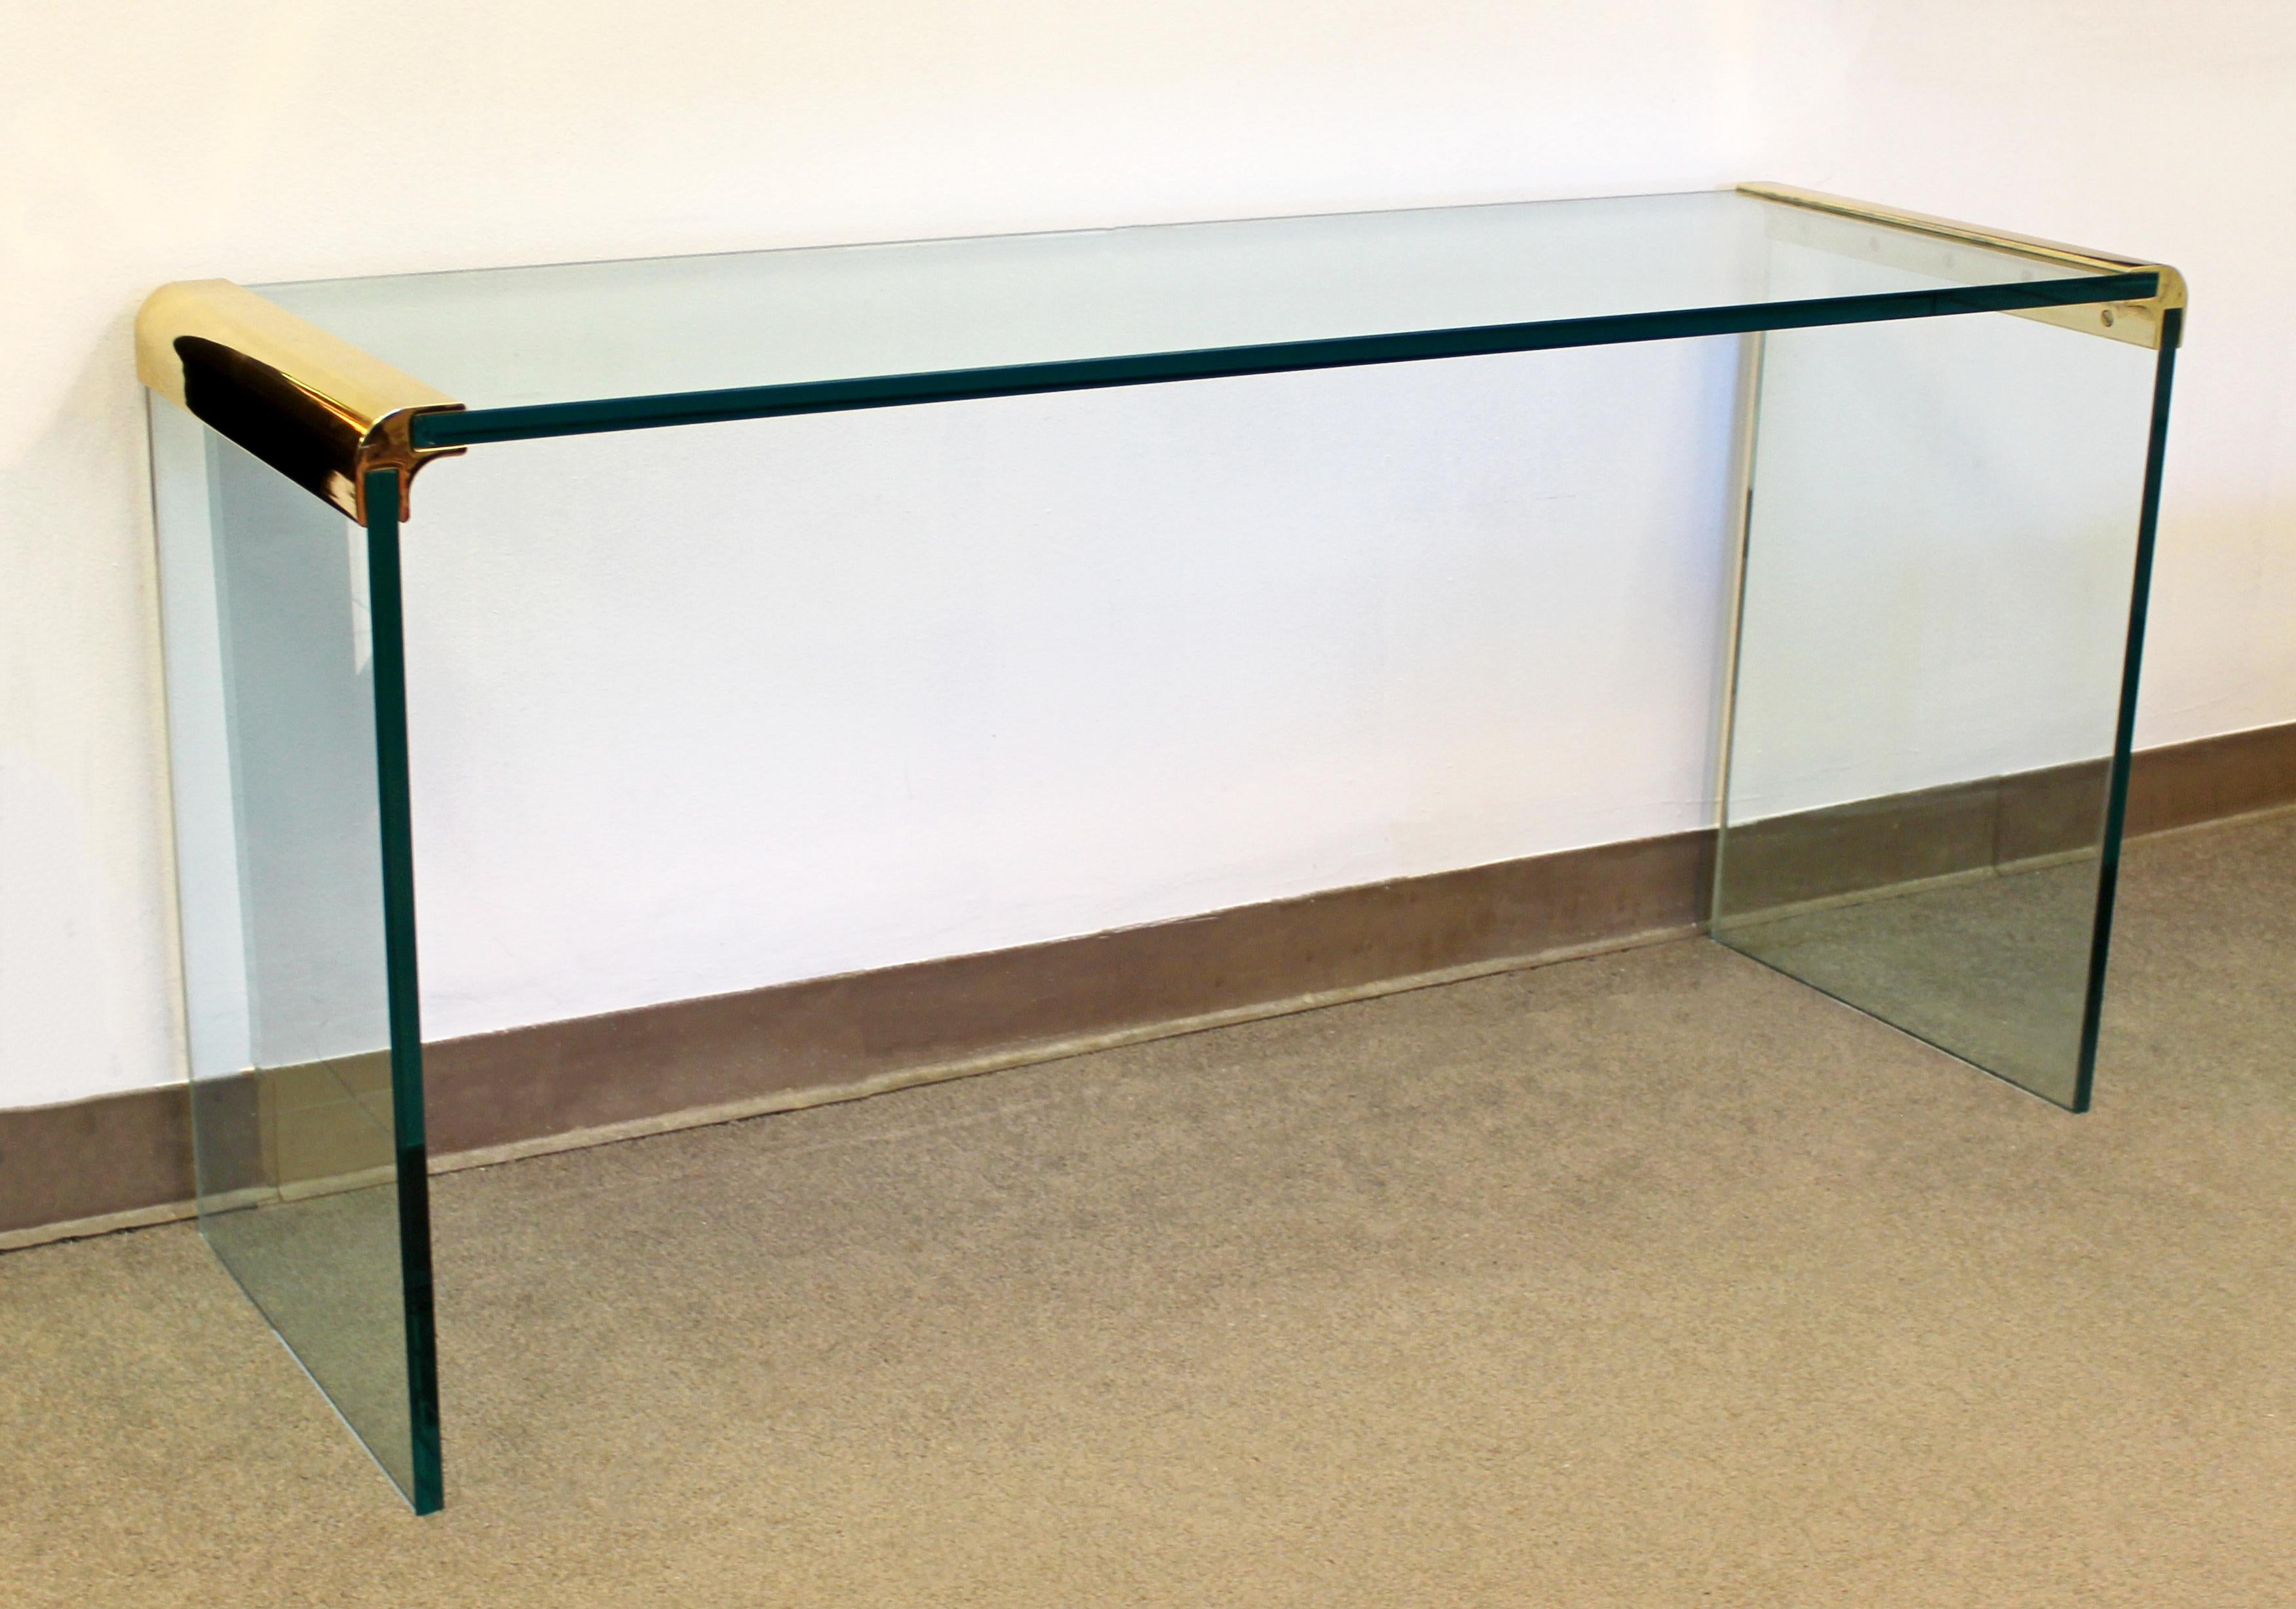 For your consideration is a fantastic, waterfall console table, made of brass and glass, by Pace, circa 1970s. In excellent condition with some minor surface scratches in the glass. The dimensions are 56.5